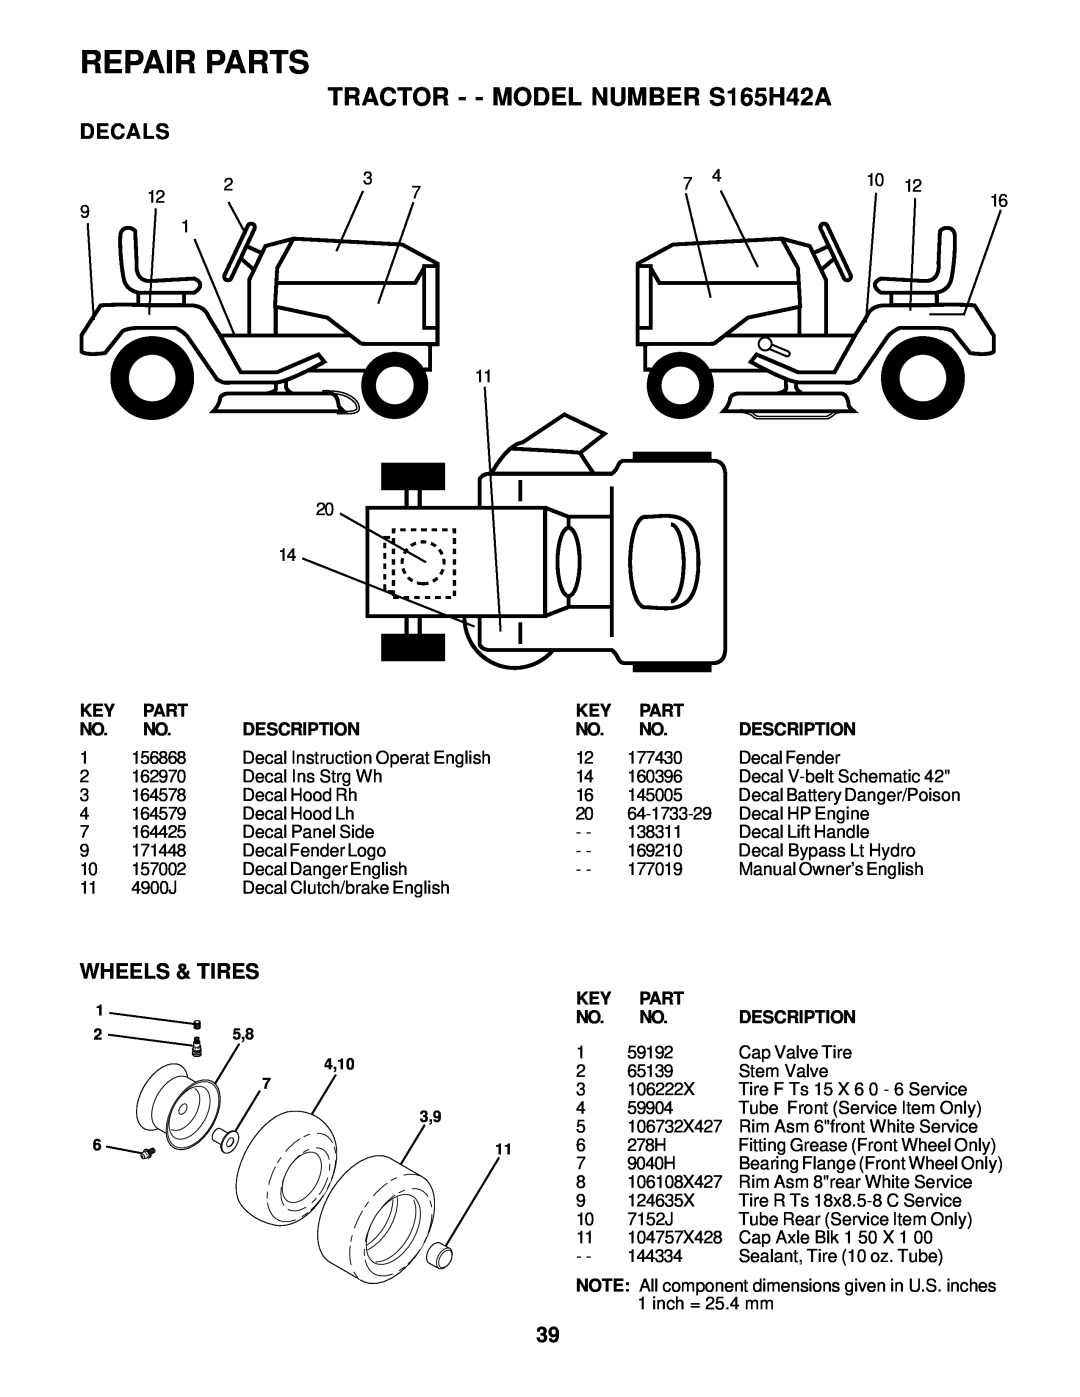 Weed Eater owner manual Decals, Wheels & Tires, Repair Parts, TRACTOR - - MODEL NUMBER S165H42A 